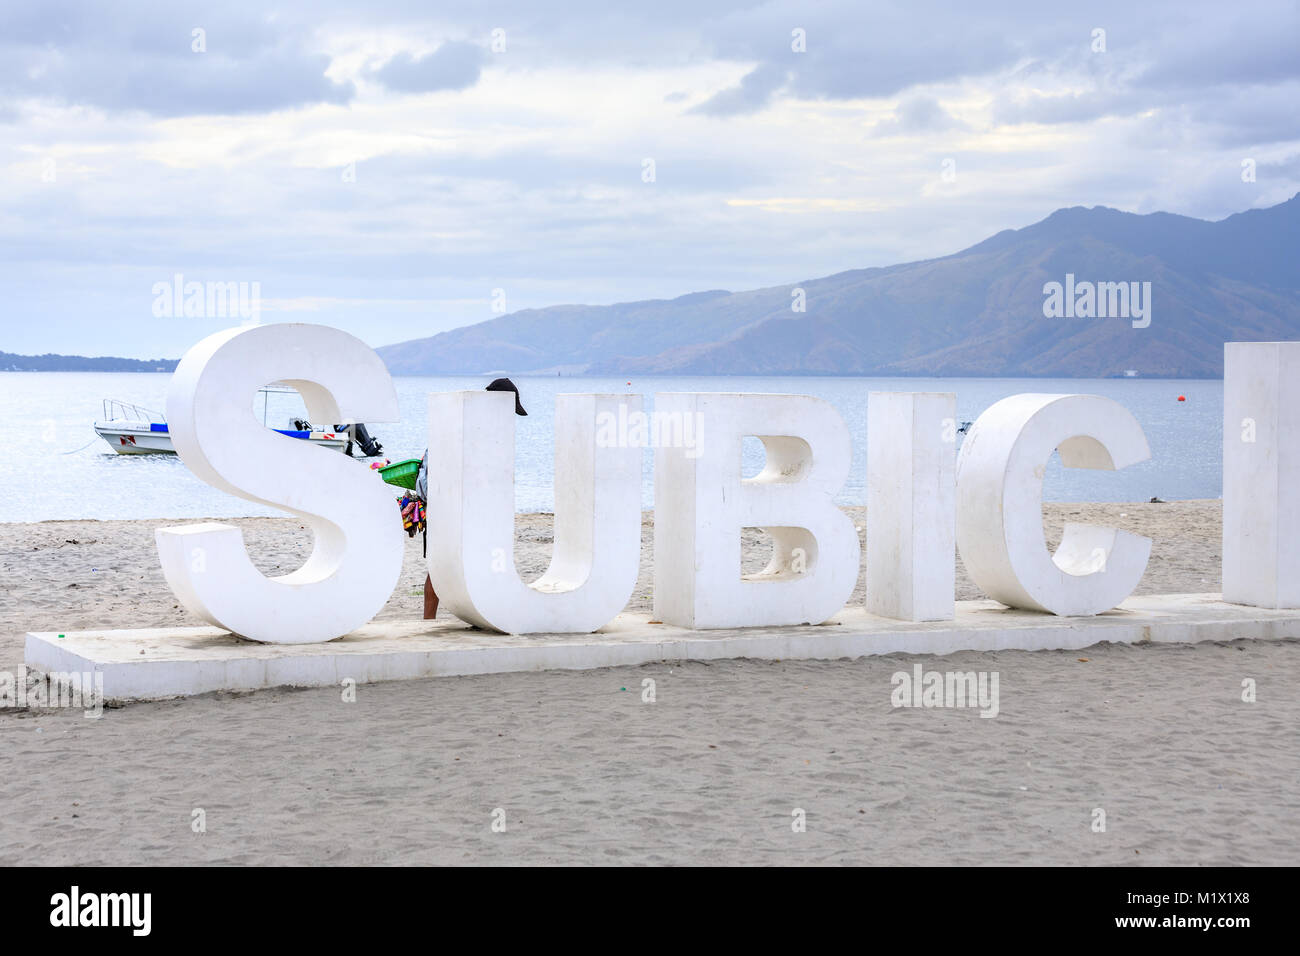 SUBIC BAY, PHILIPPINES : JAN 28, 2018 - Landmark of Subic Bay port which is photo zone in Subic, Zambales Stock Photo